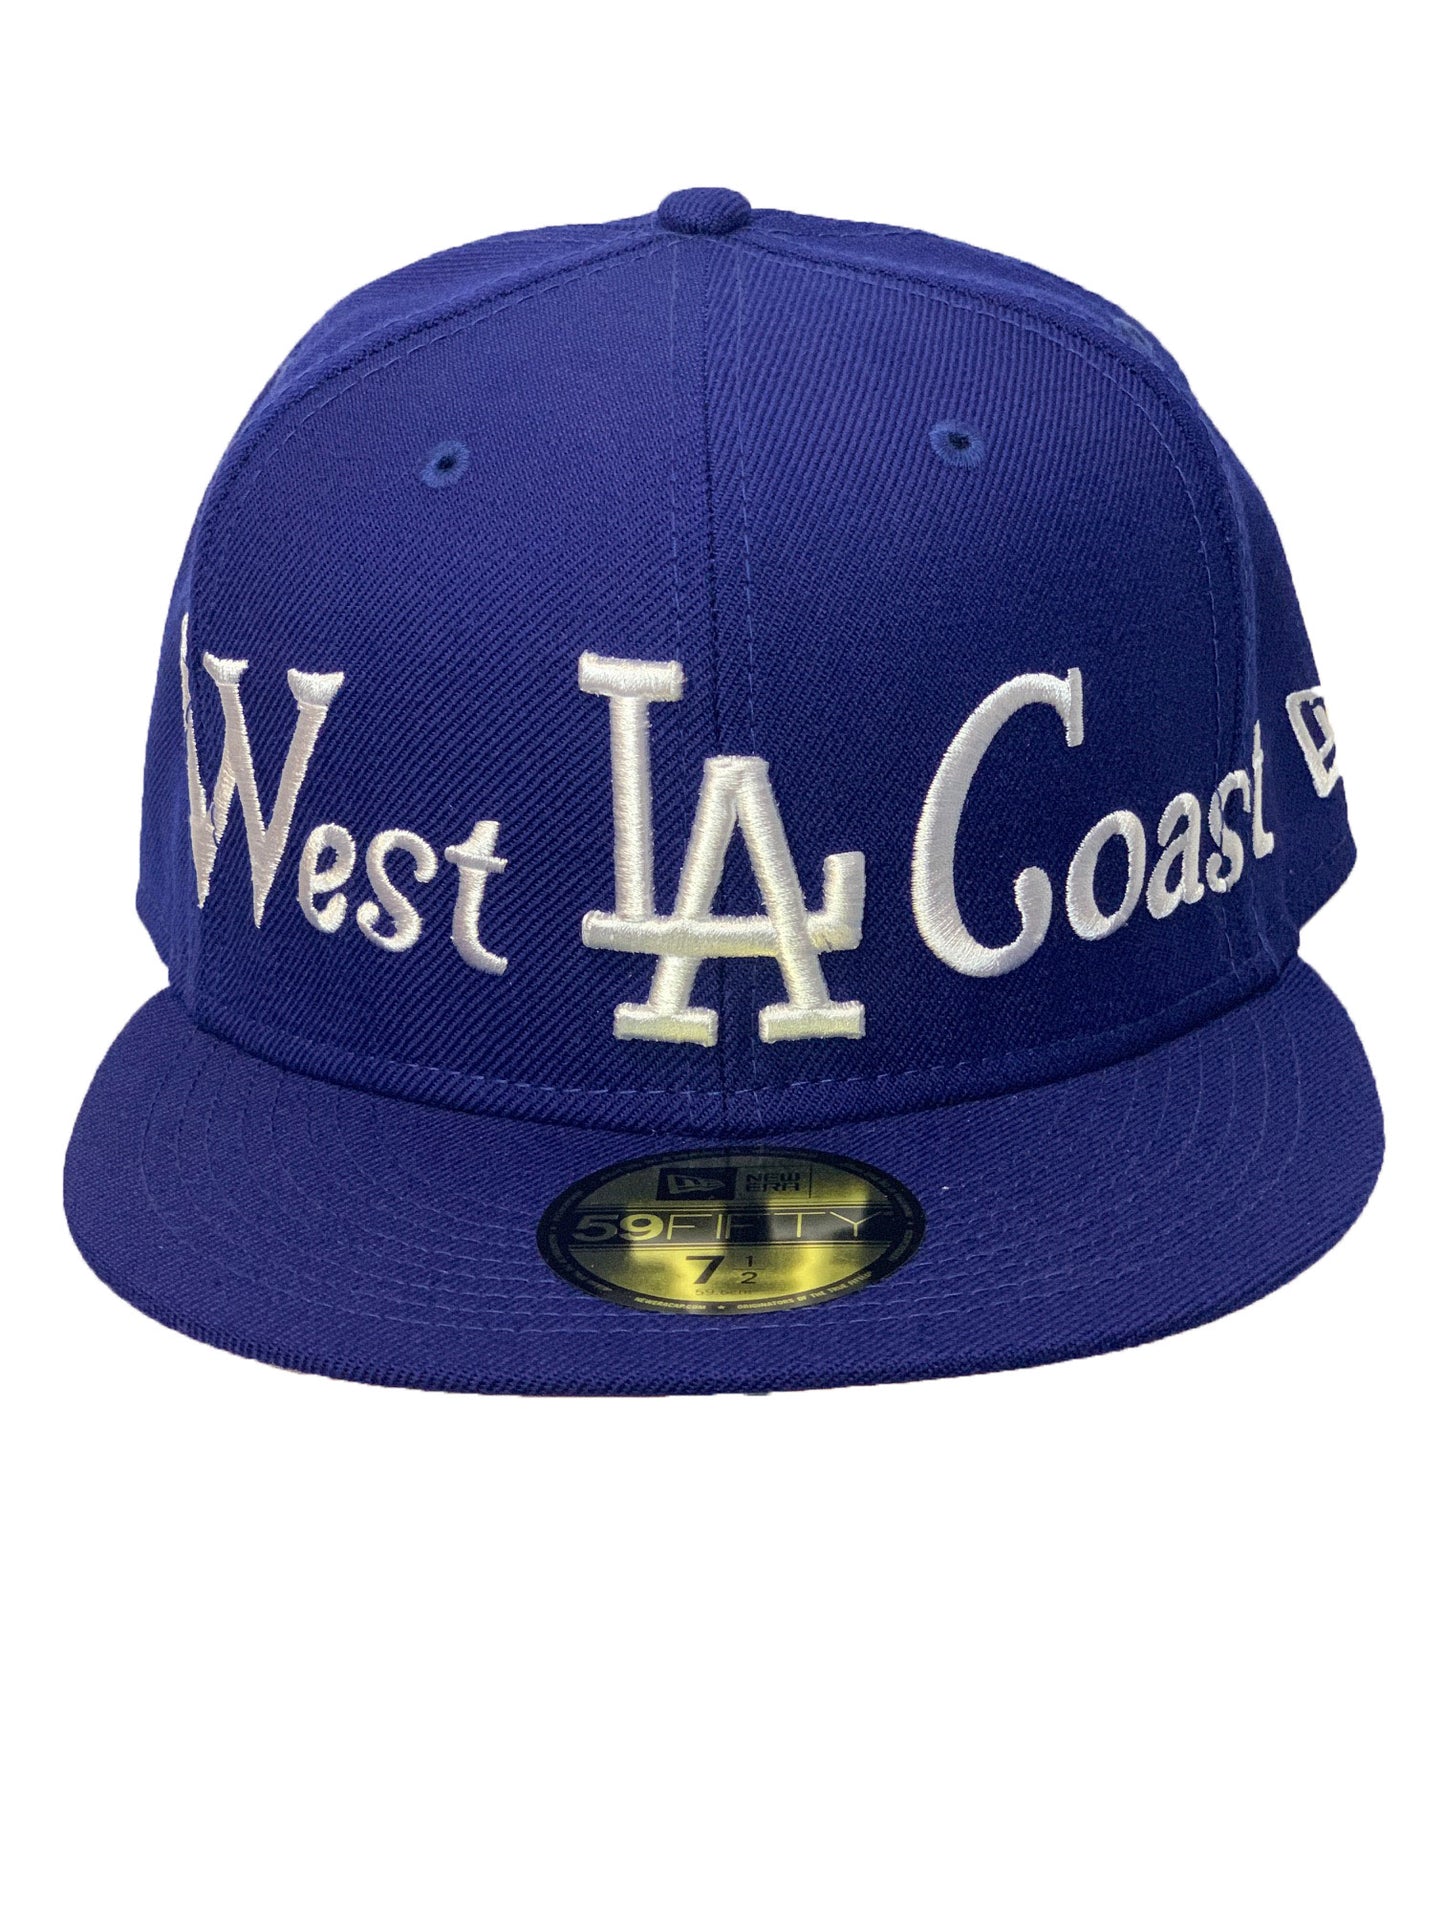 Los Angeles Dodgers New Era City Nickname 59FIFTY Fitted Hat - Royal